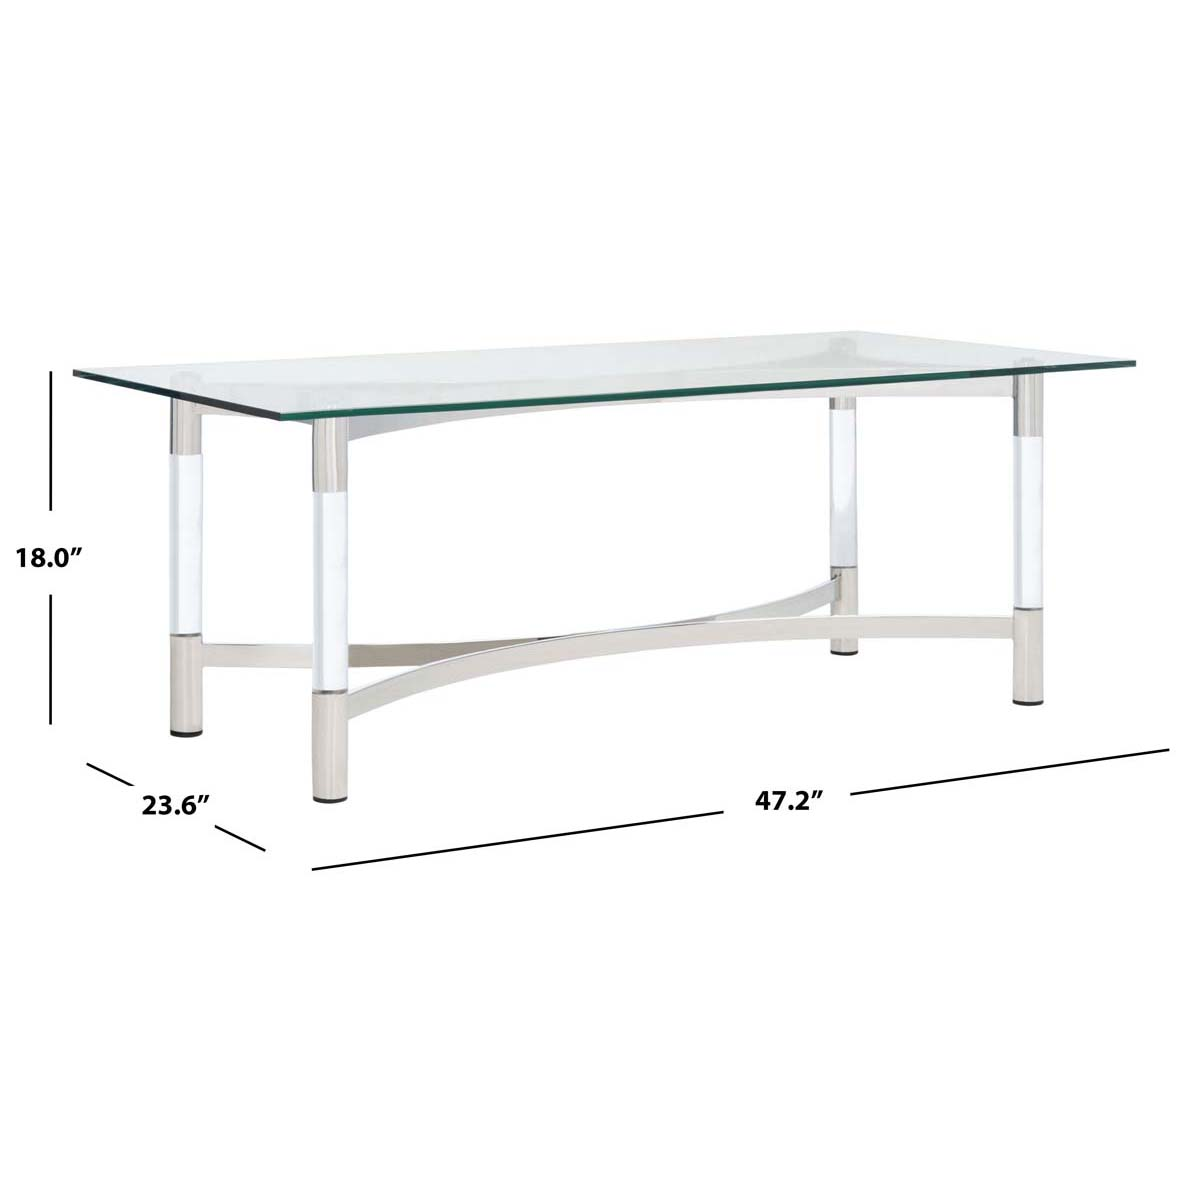 Safavieh Couture Letty Acrylic Coffee Table - Silver